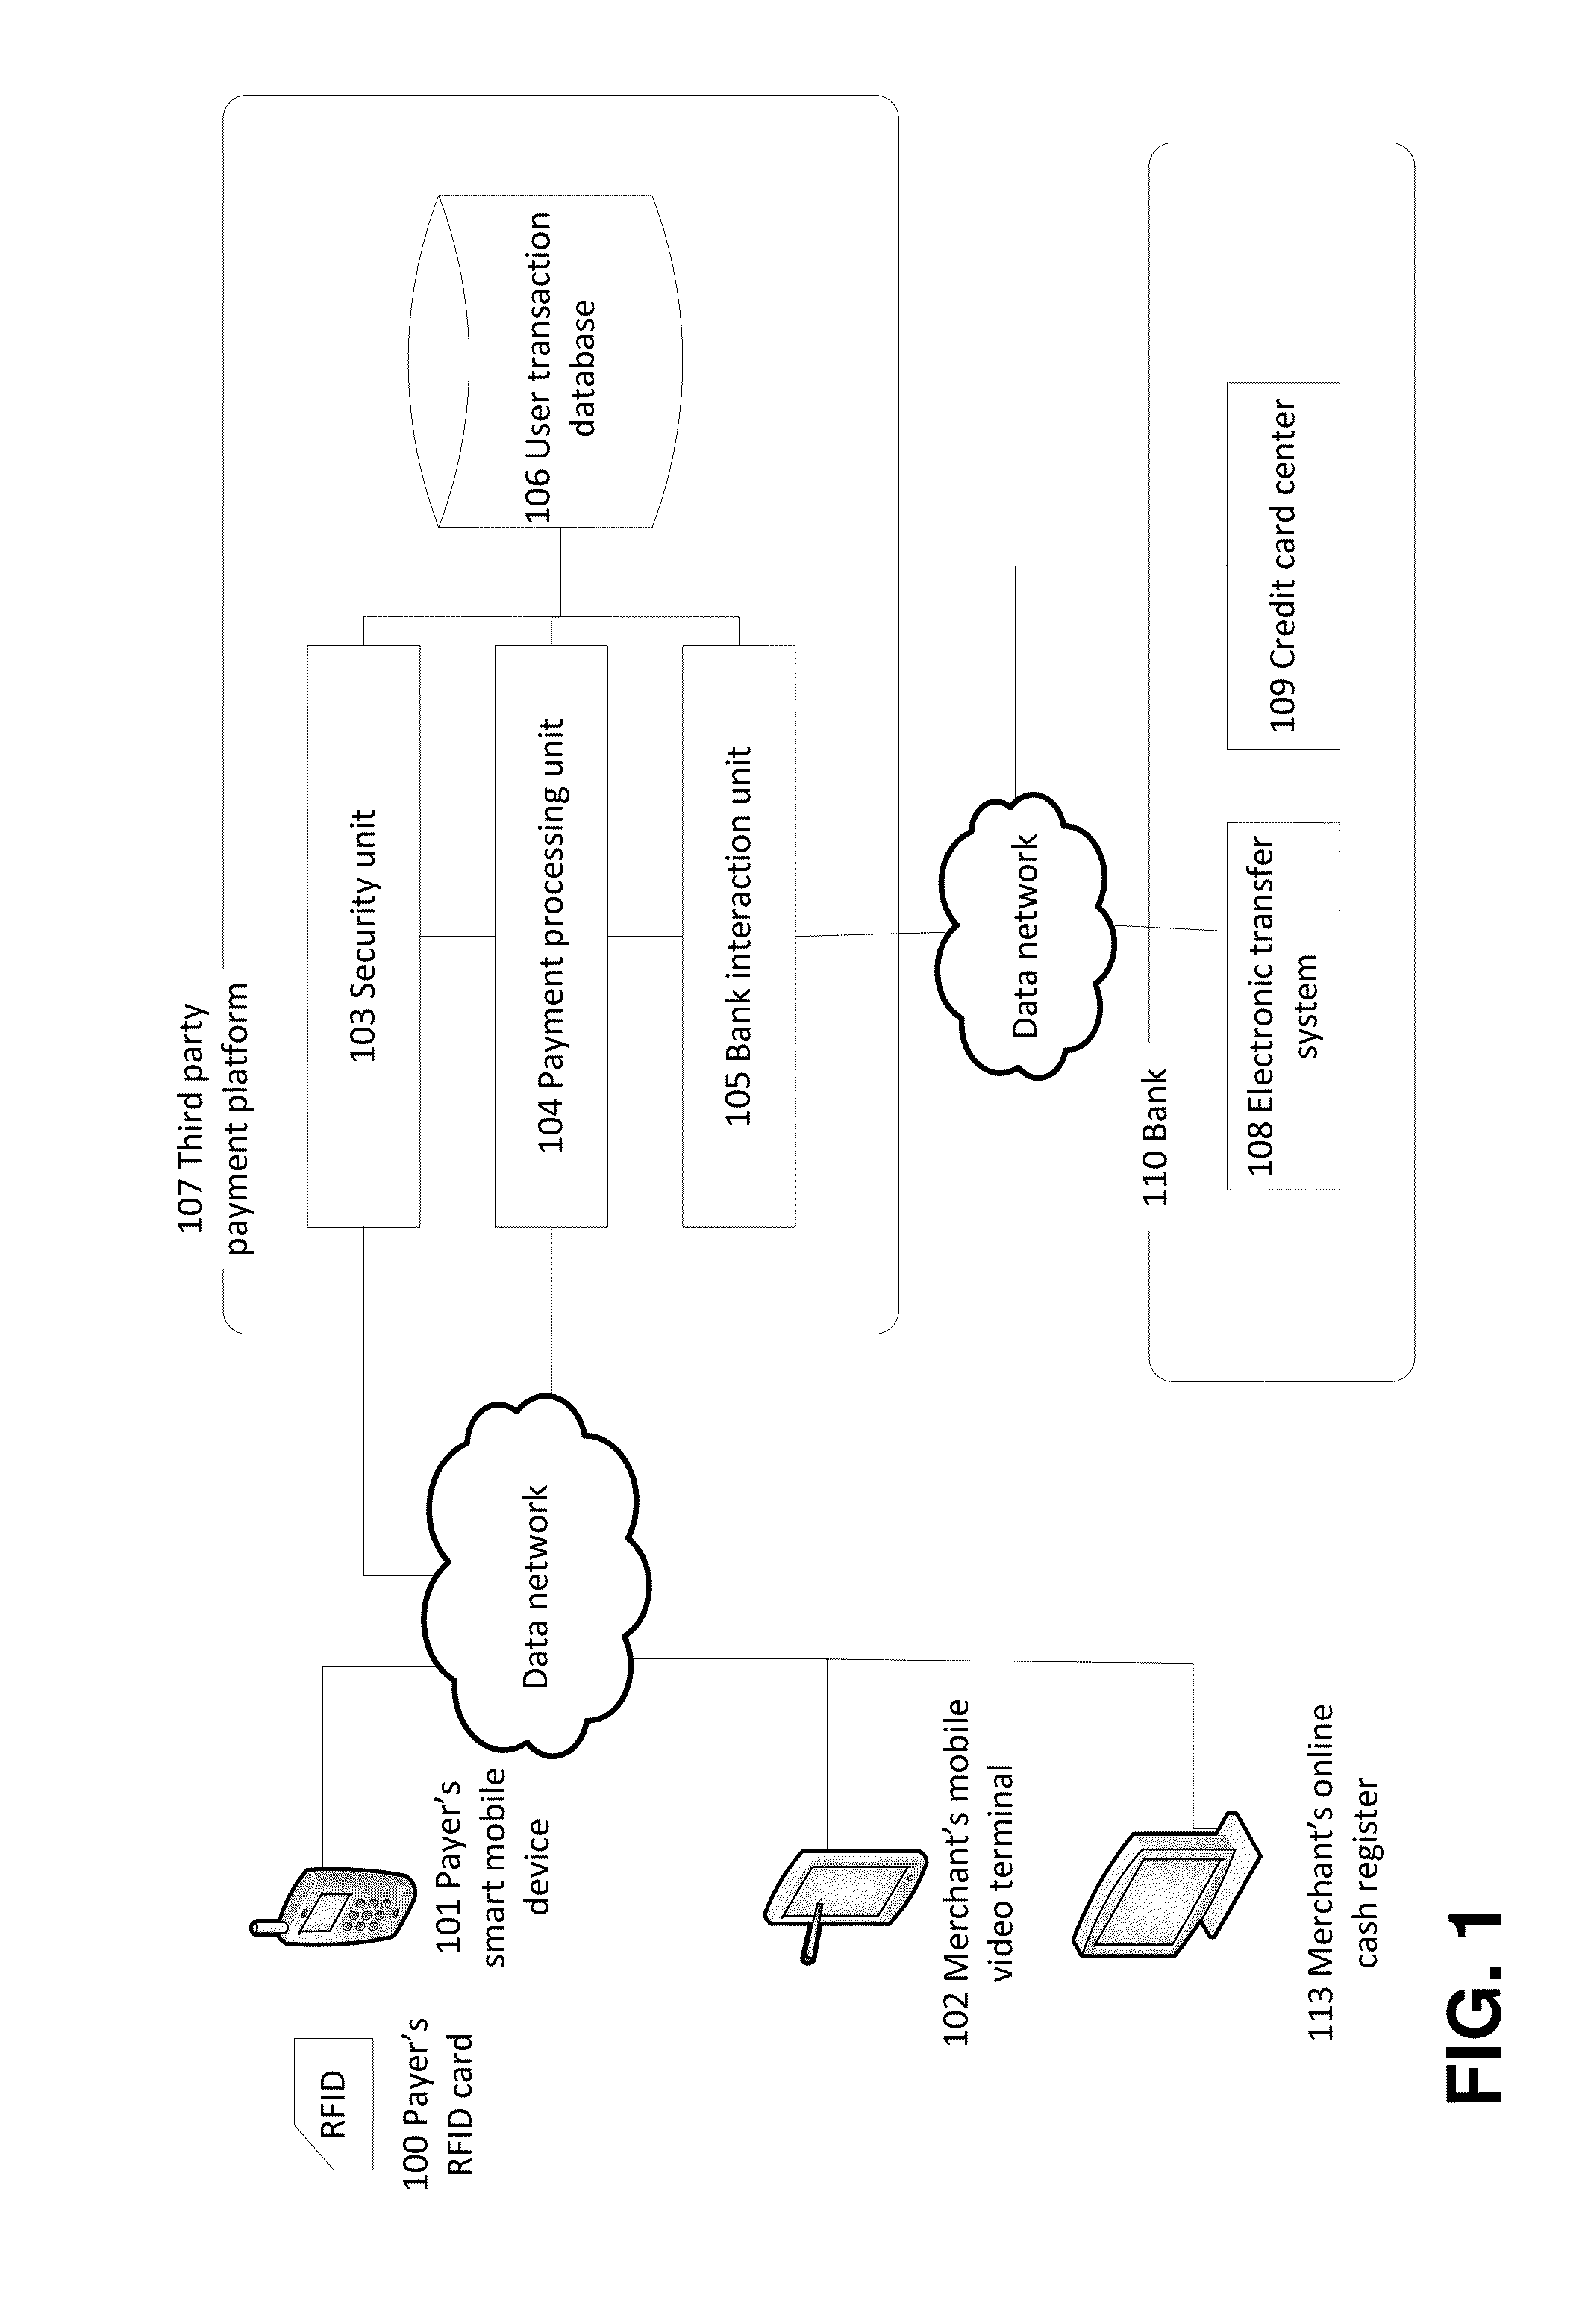 Electronic-payment authentication process with an eye-positioning method for unlocking a pattern lock